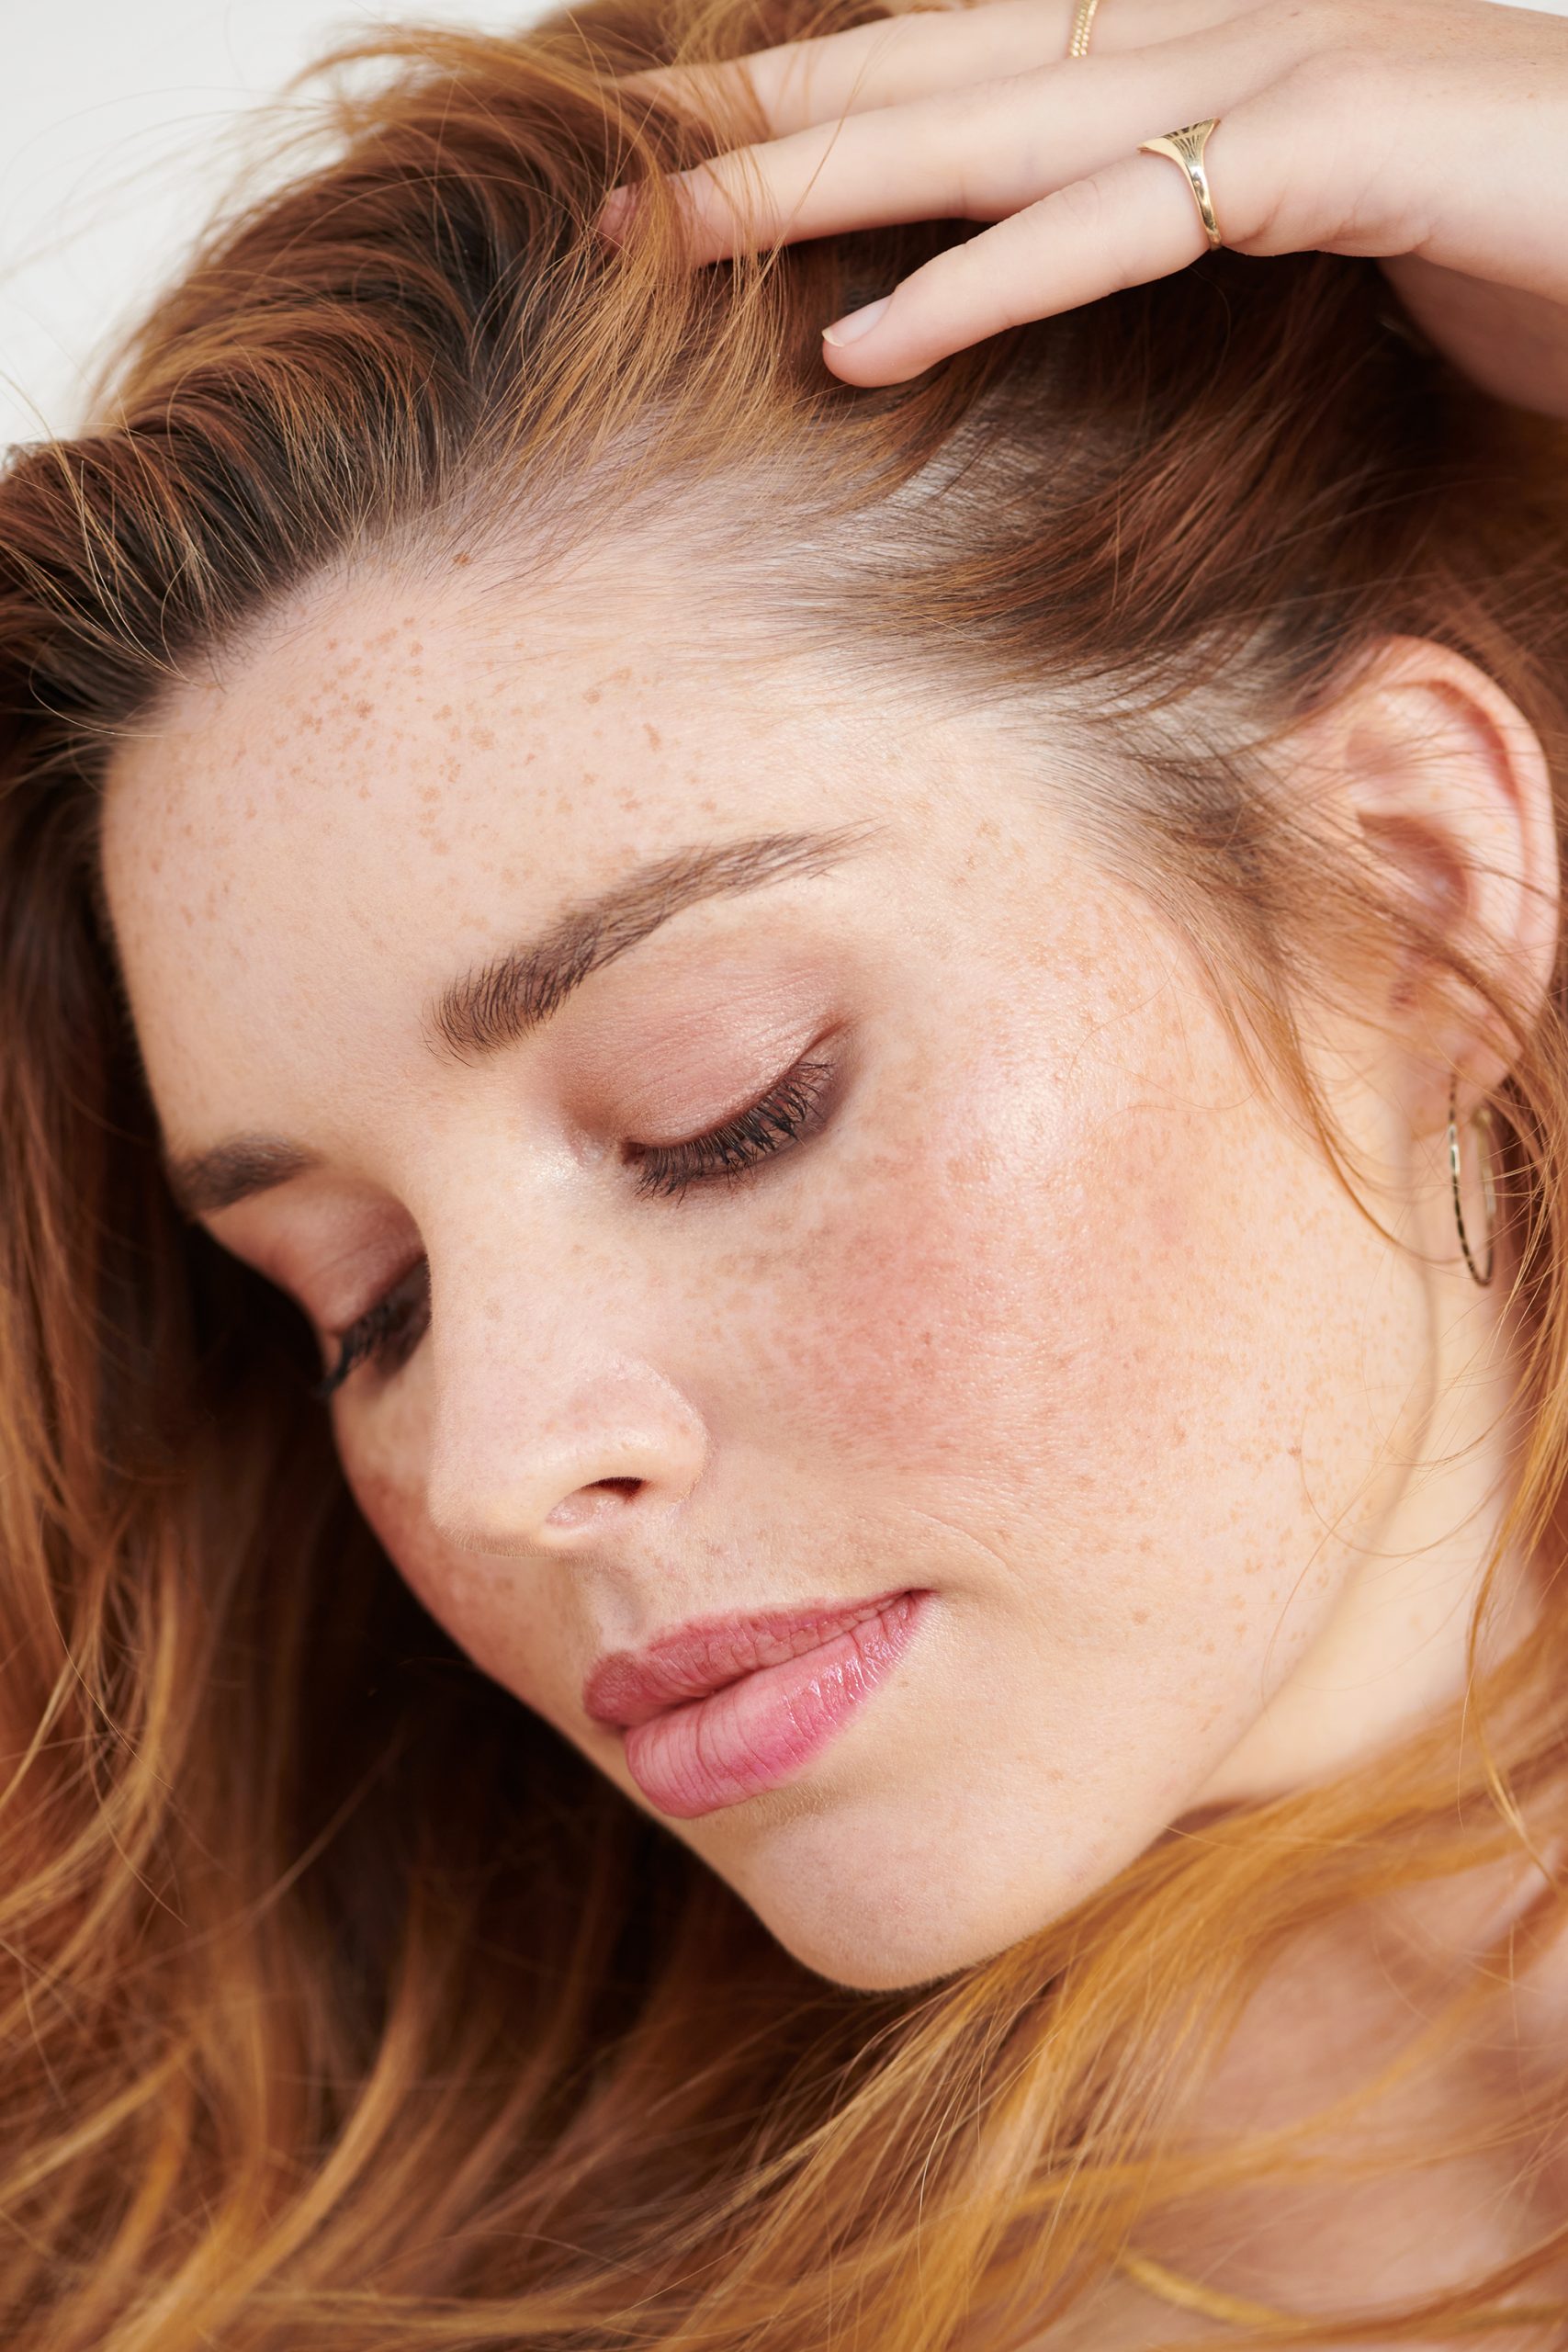 3 Things You Can Do to Take Great Care of Your Skin This Fall